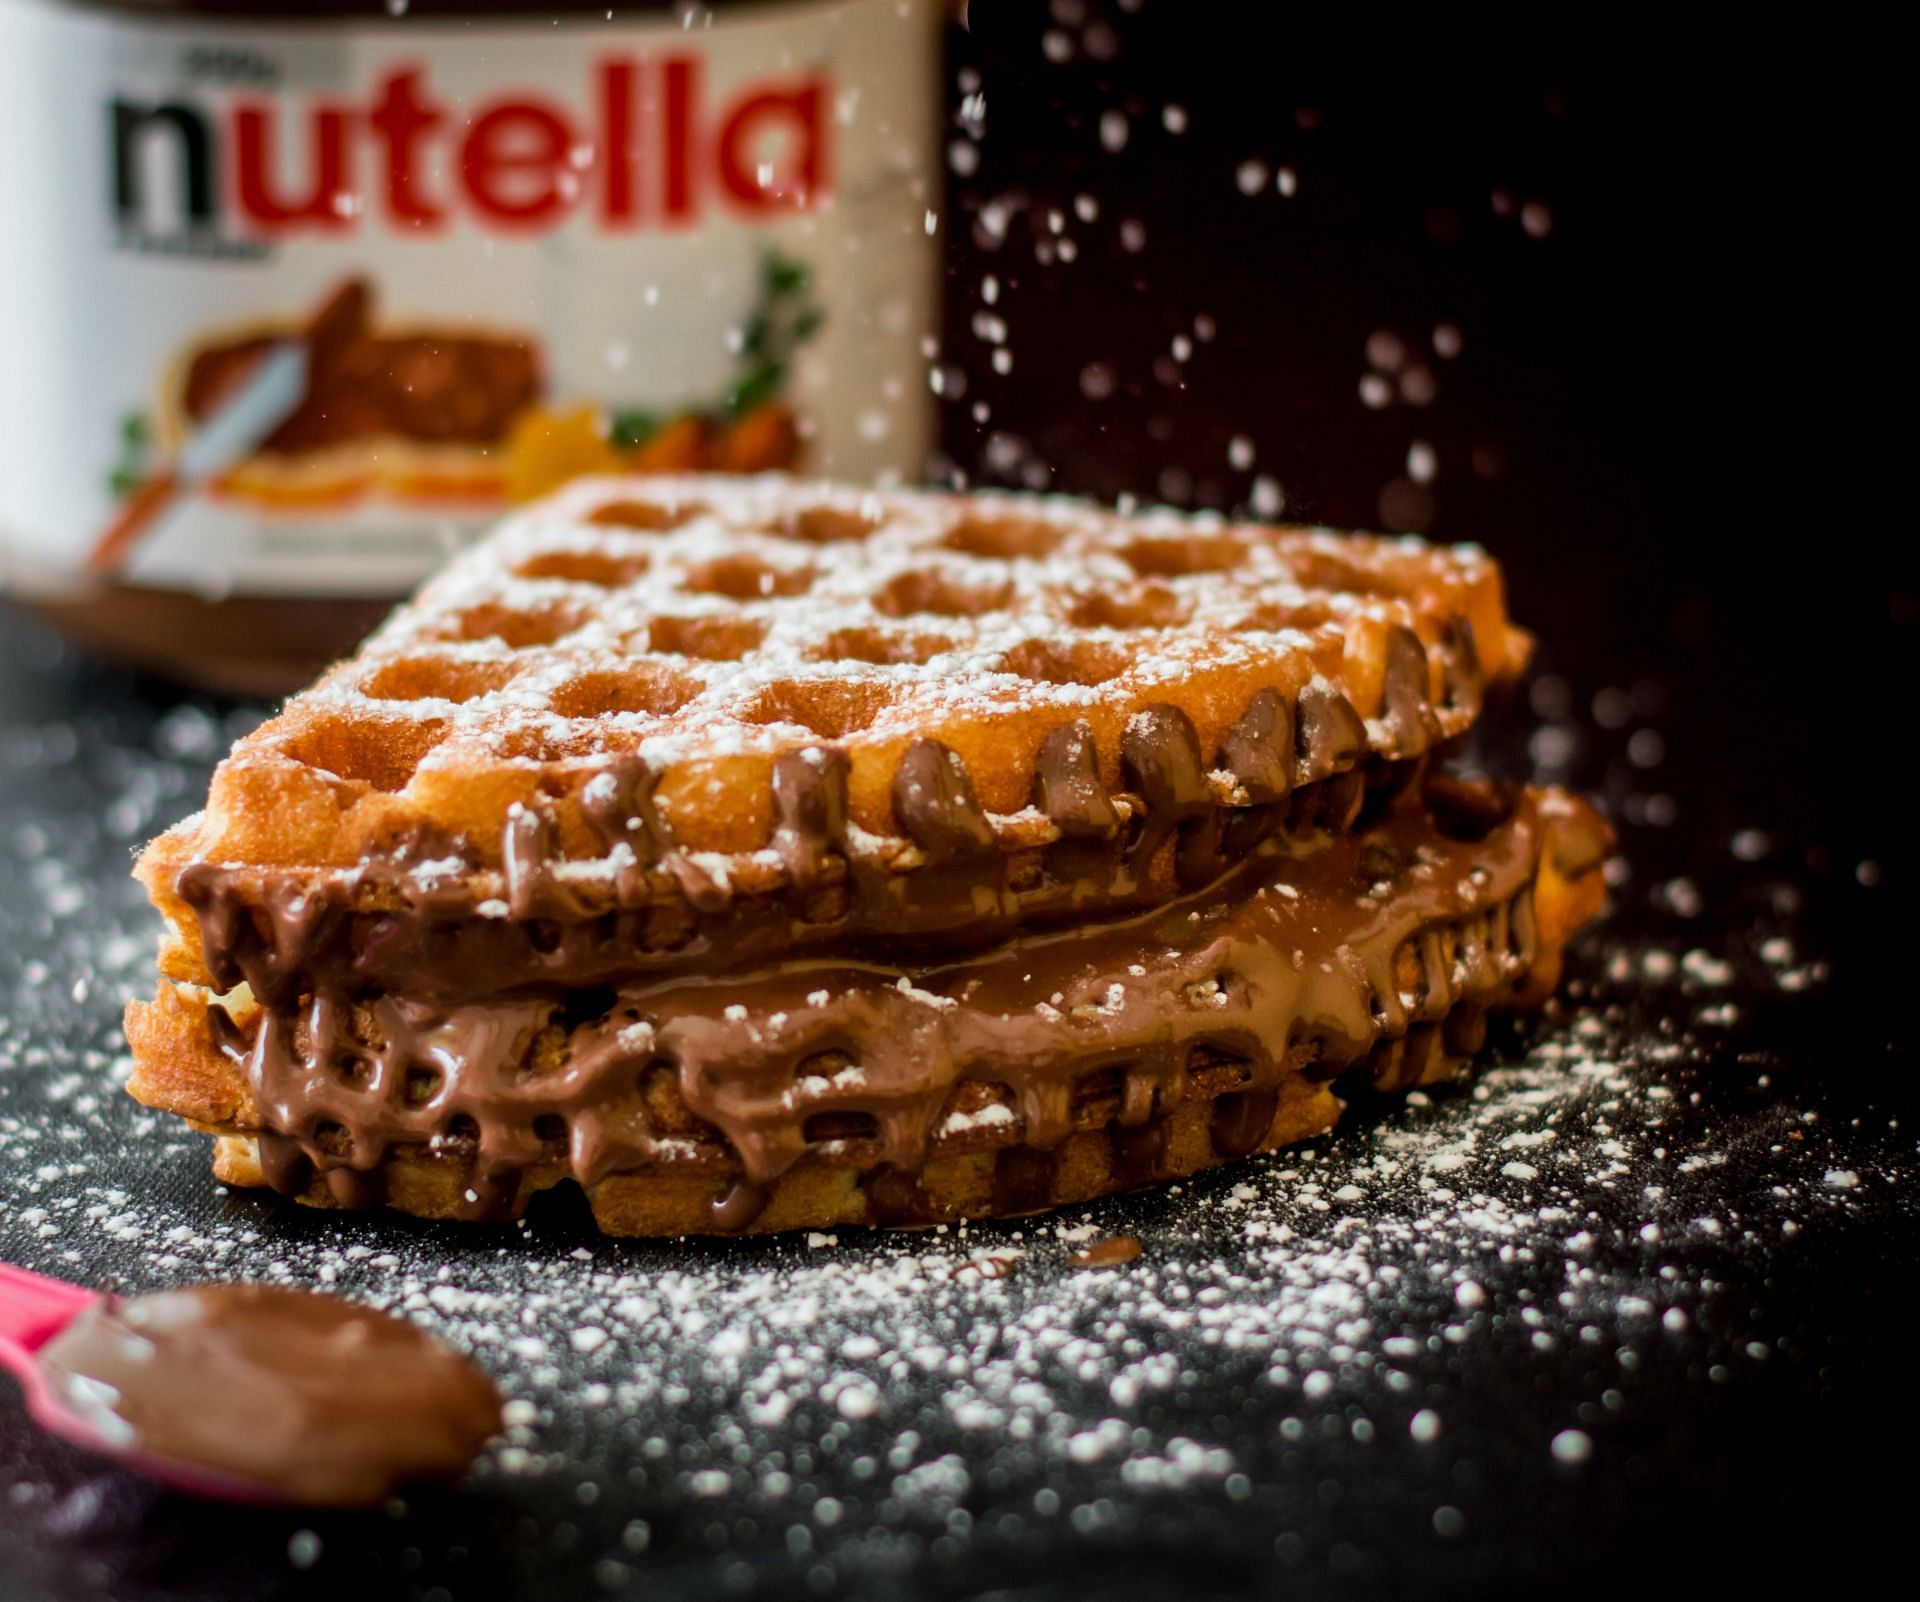 Waffle as a bad carb (image sourced via Pexels / Photo by anurag)